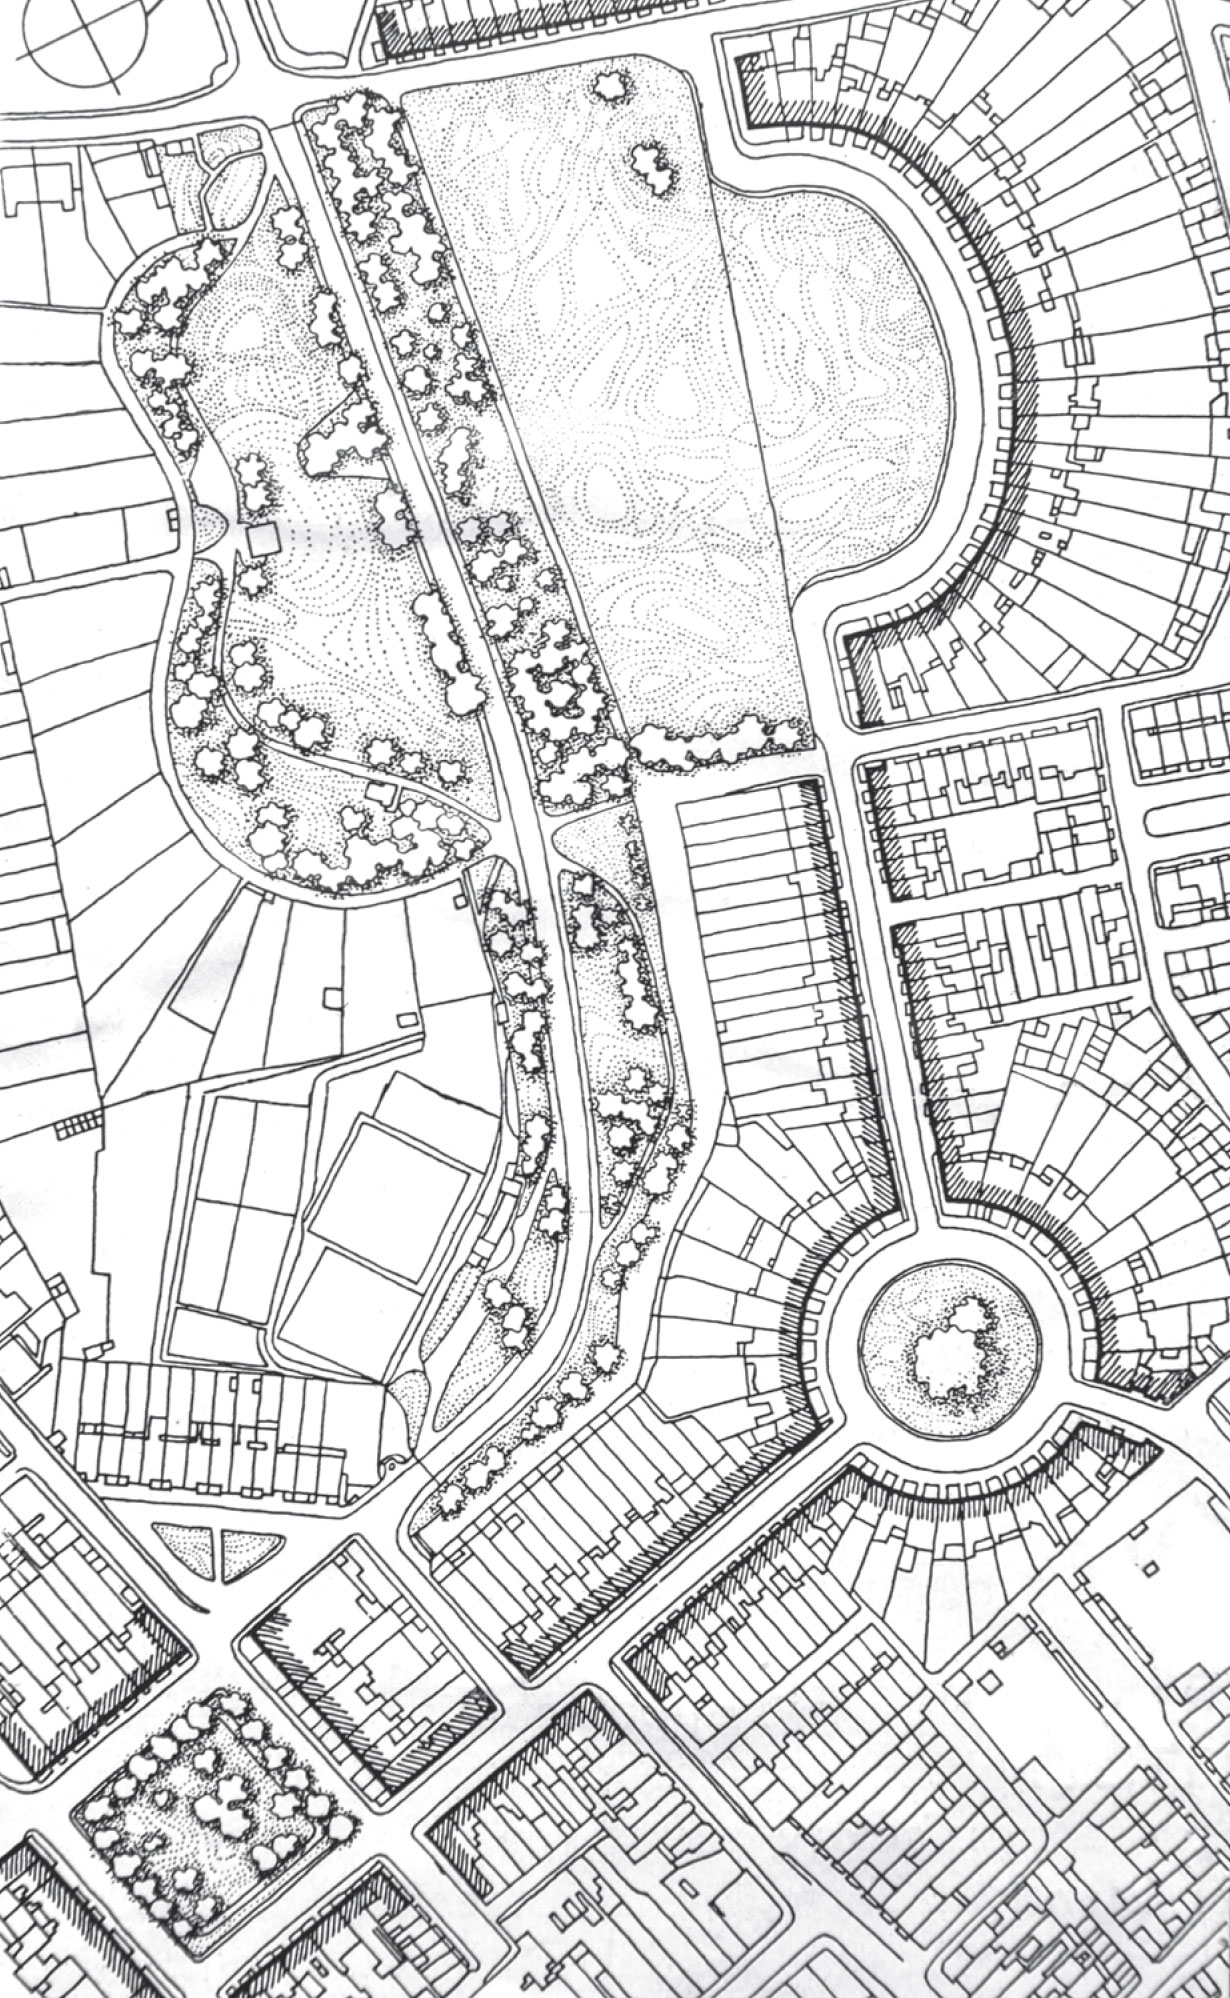 Site plan of the Circus in Bath